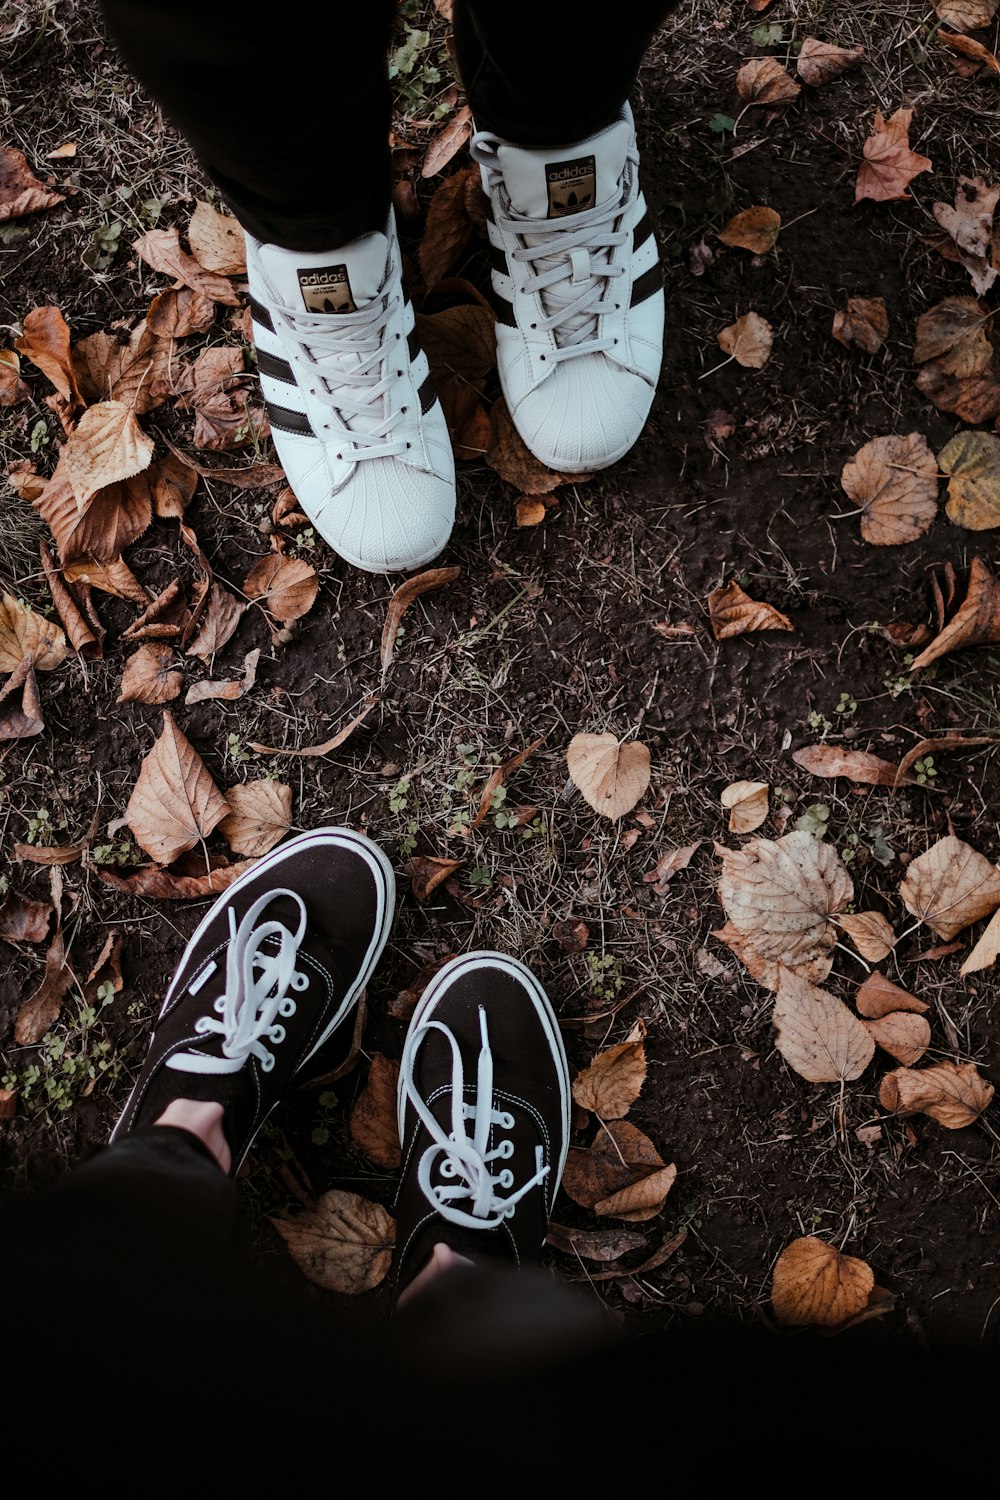 person wearing black and white sneakers standing on dried leaves